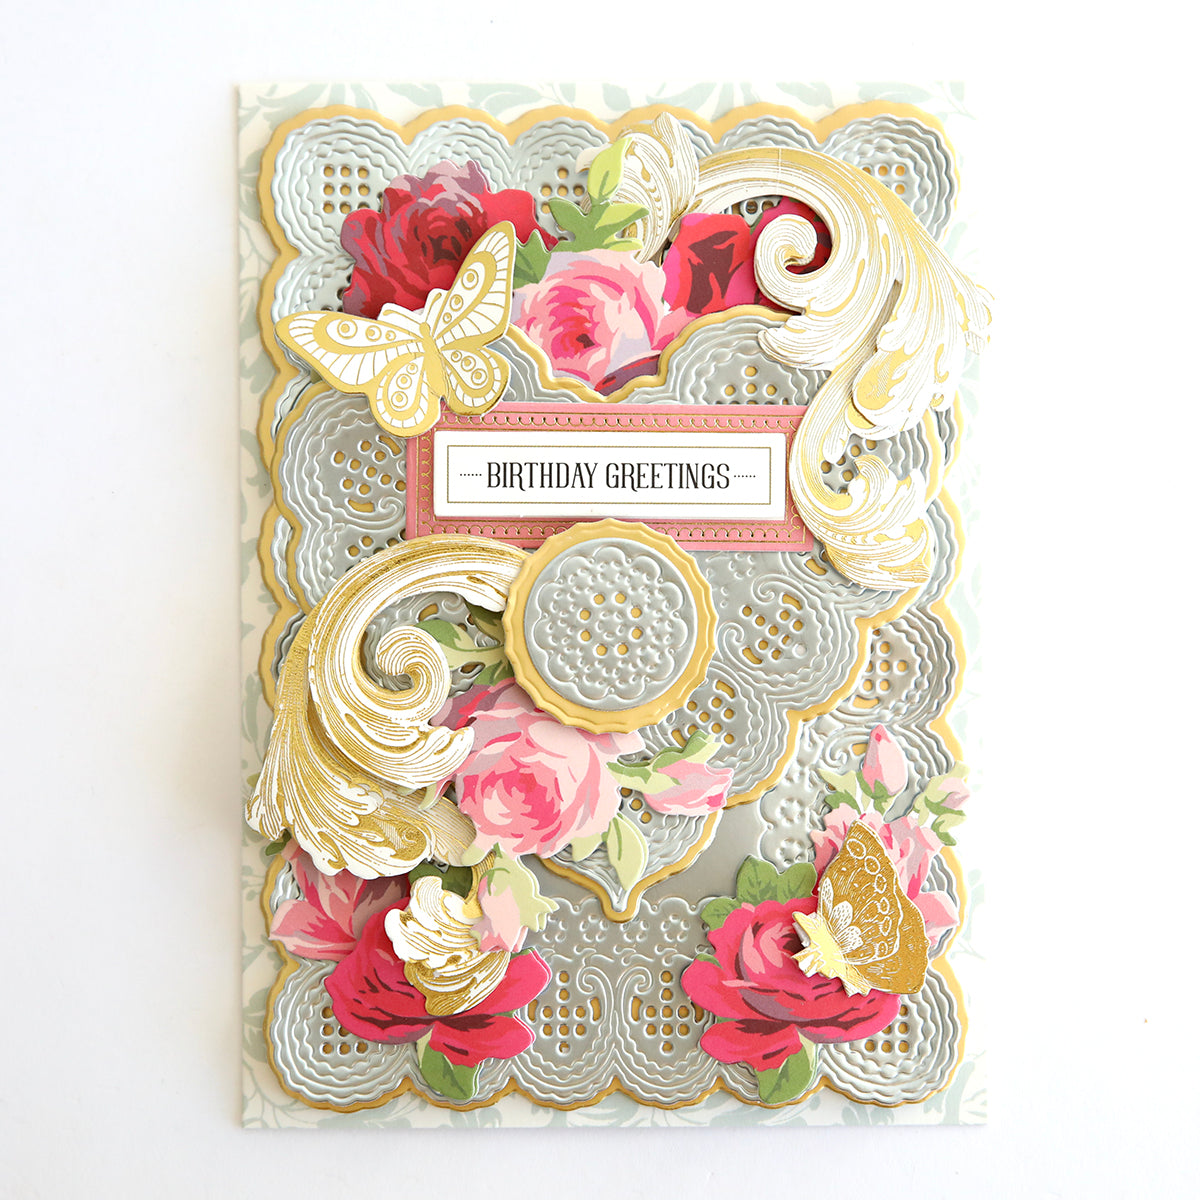 A card with 3D lace doily dies, adorned with roses and flowers, exuding an antique feel perfect for Valentine's cards.